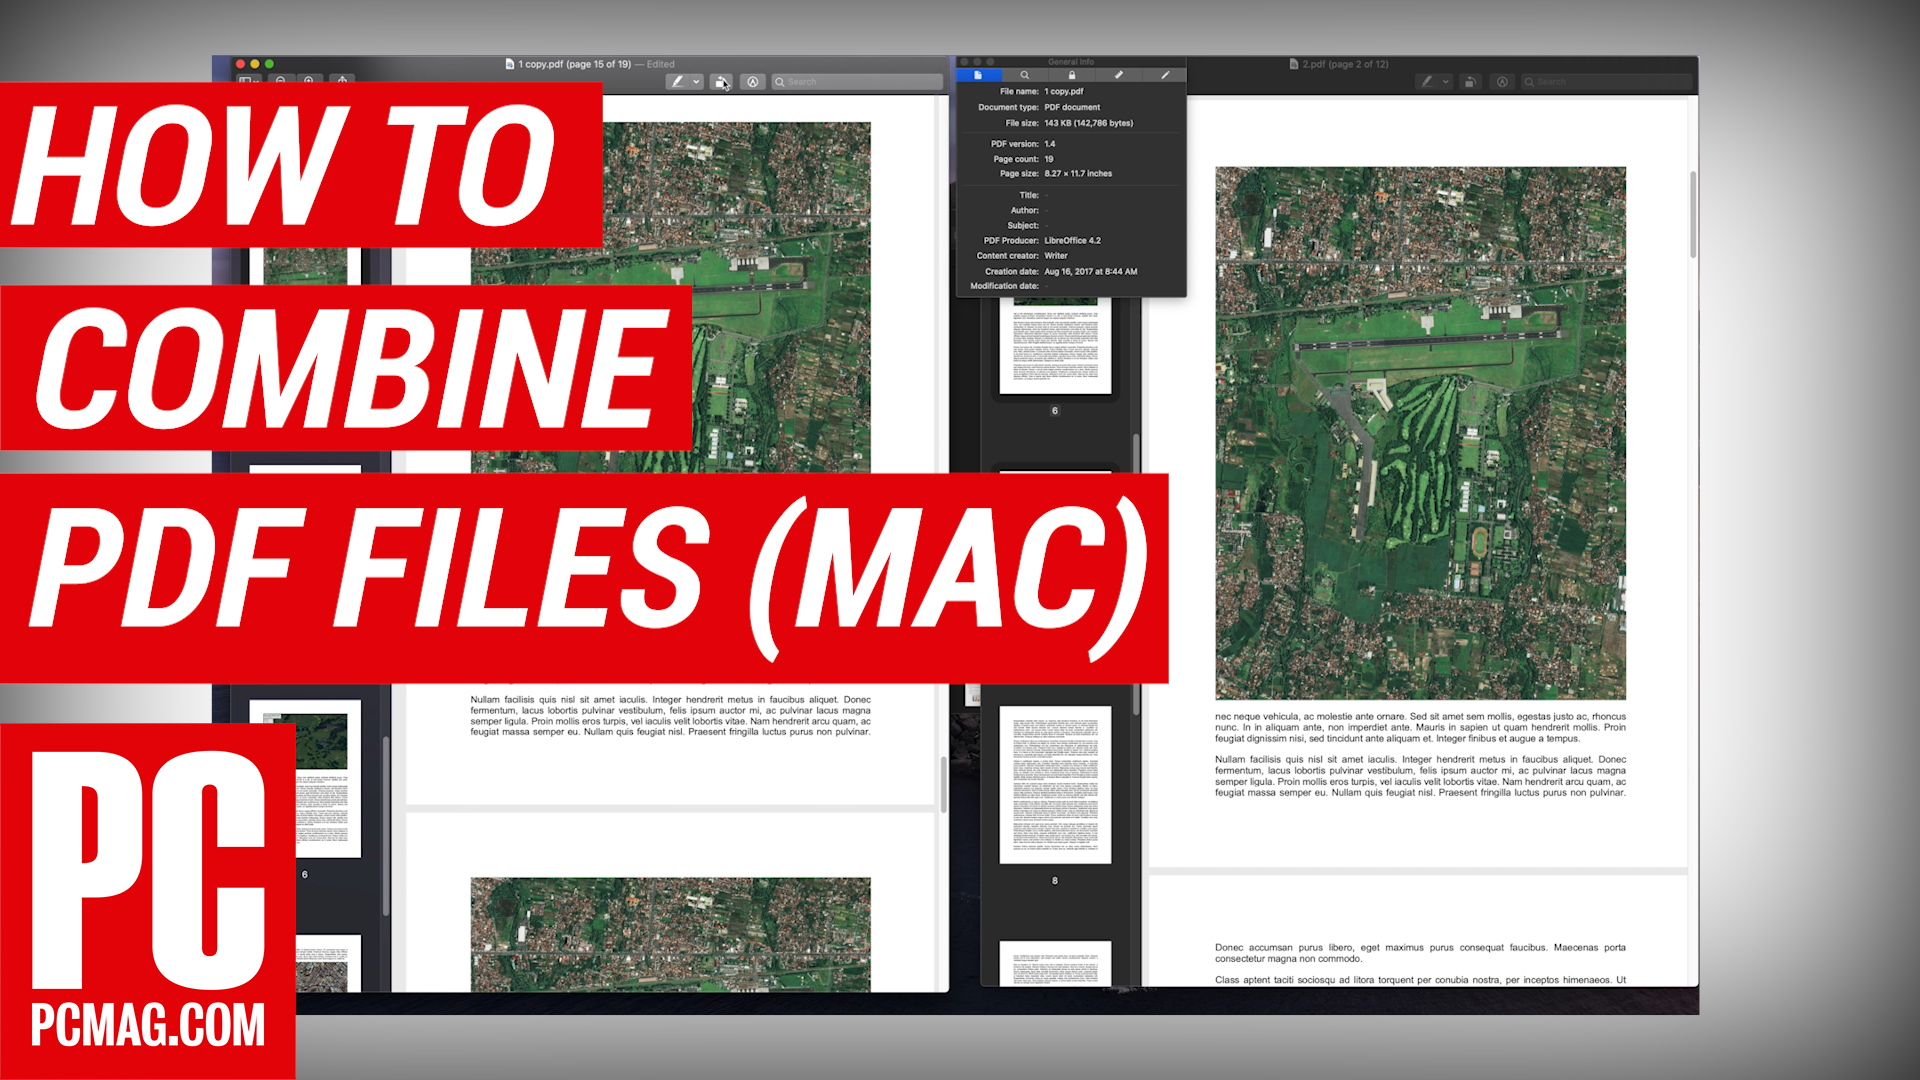 How to Combine PDF Files on a Mac